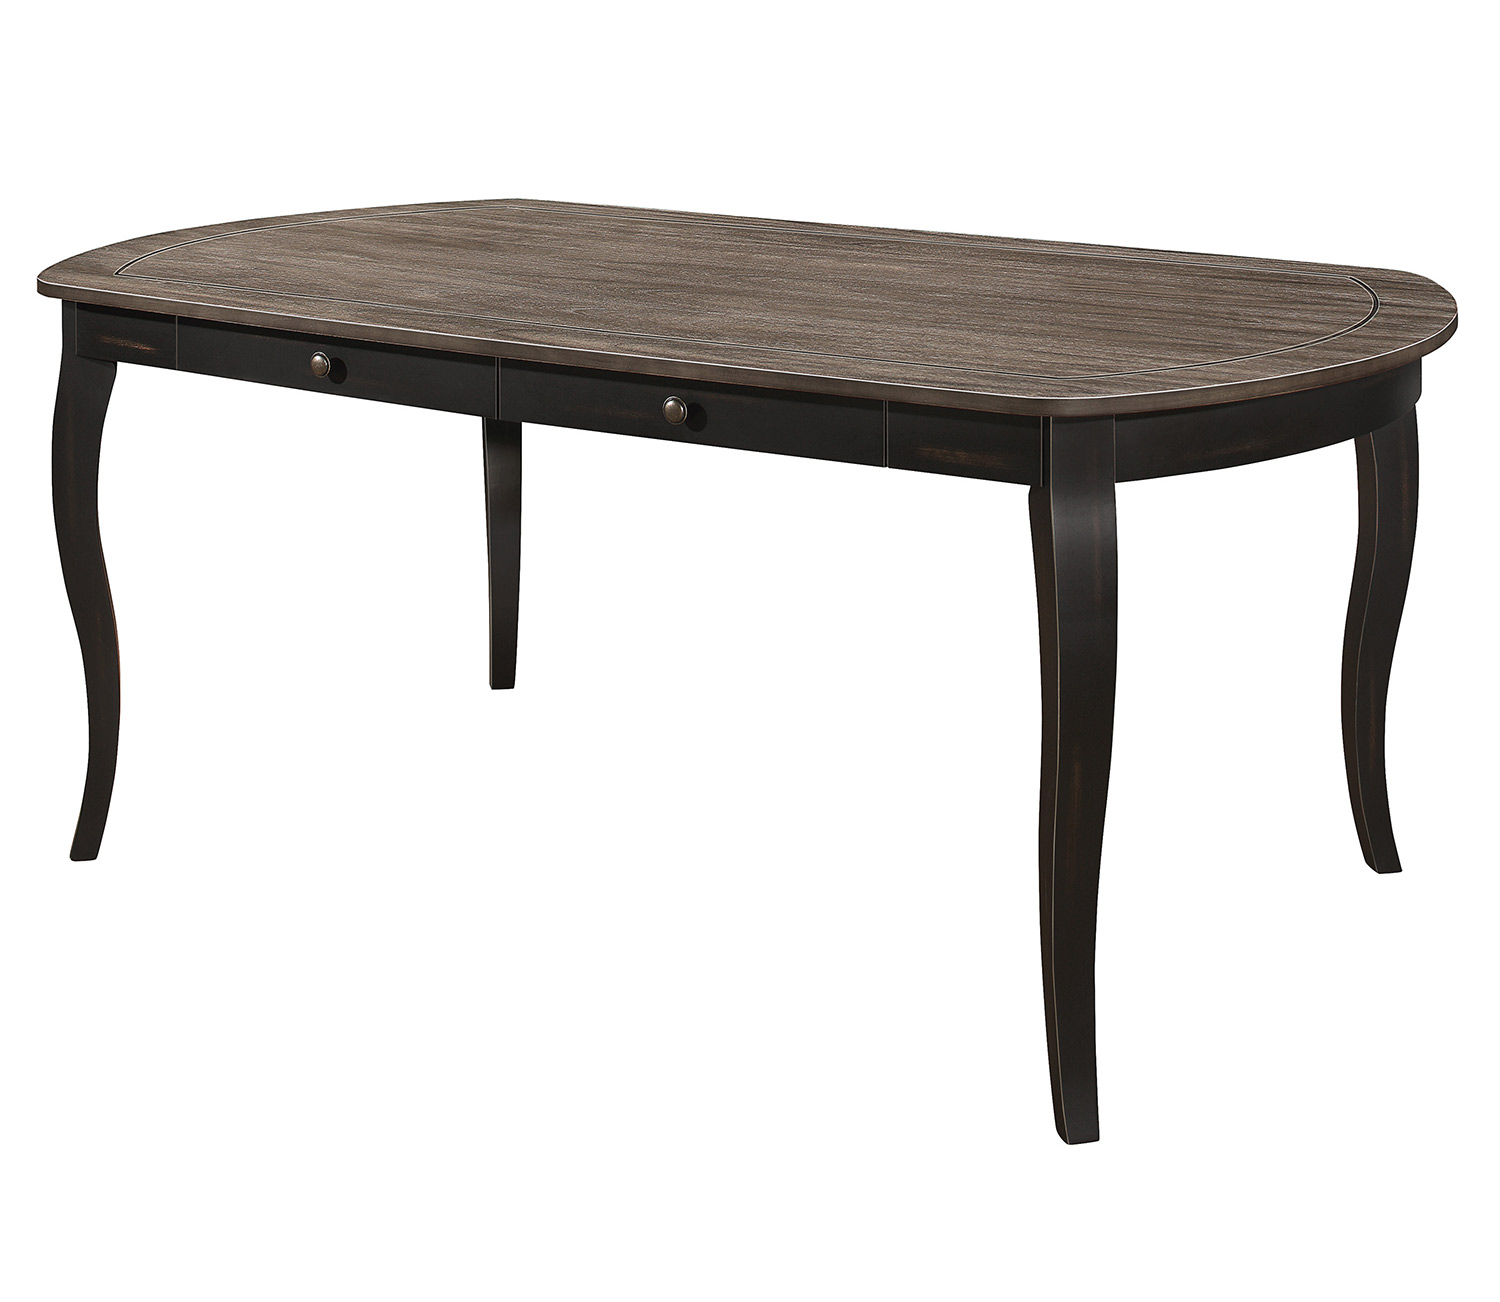 Homelegance Coring Dining Table - Antique 2-Tone